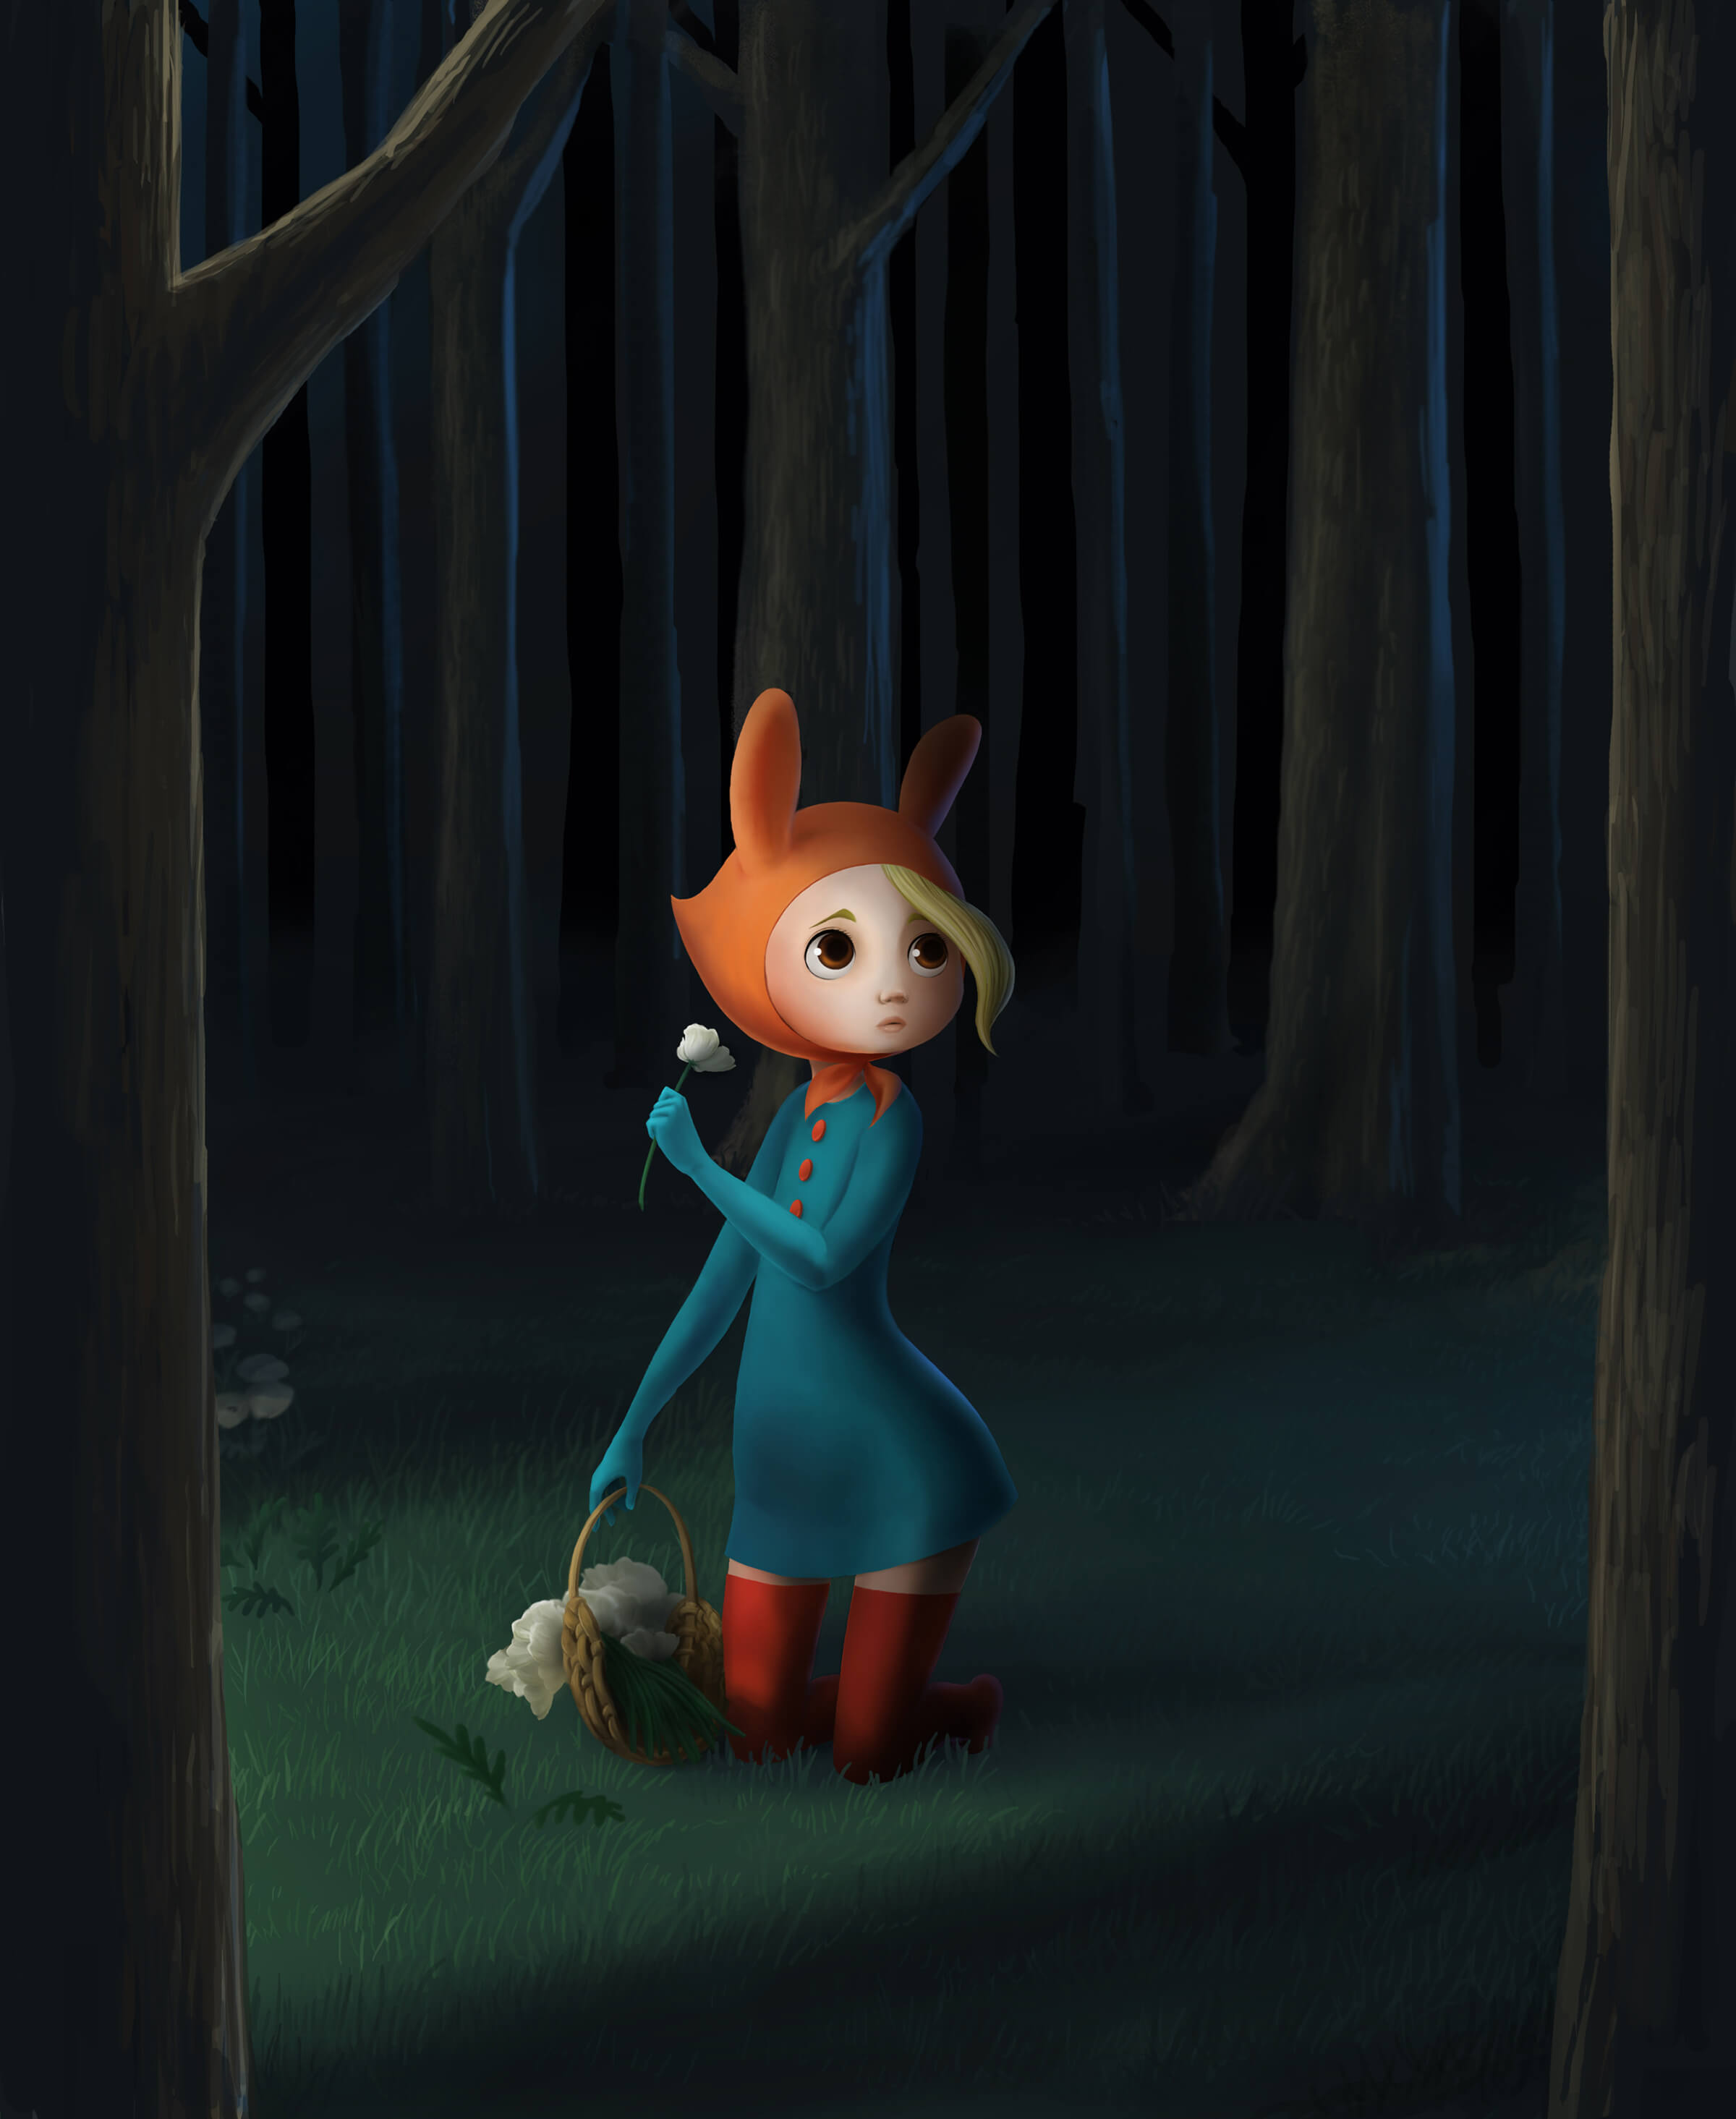 digital painting of a fearful girl in a dark forest wearing a red, bunny-eared bonnet and carrying a basket of white flowers